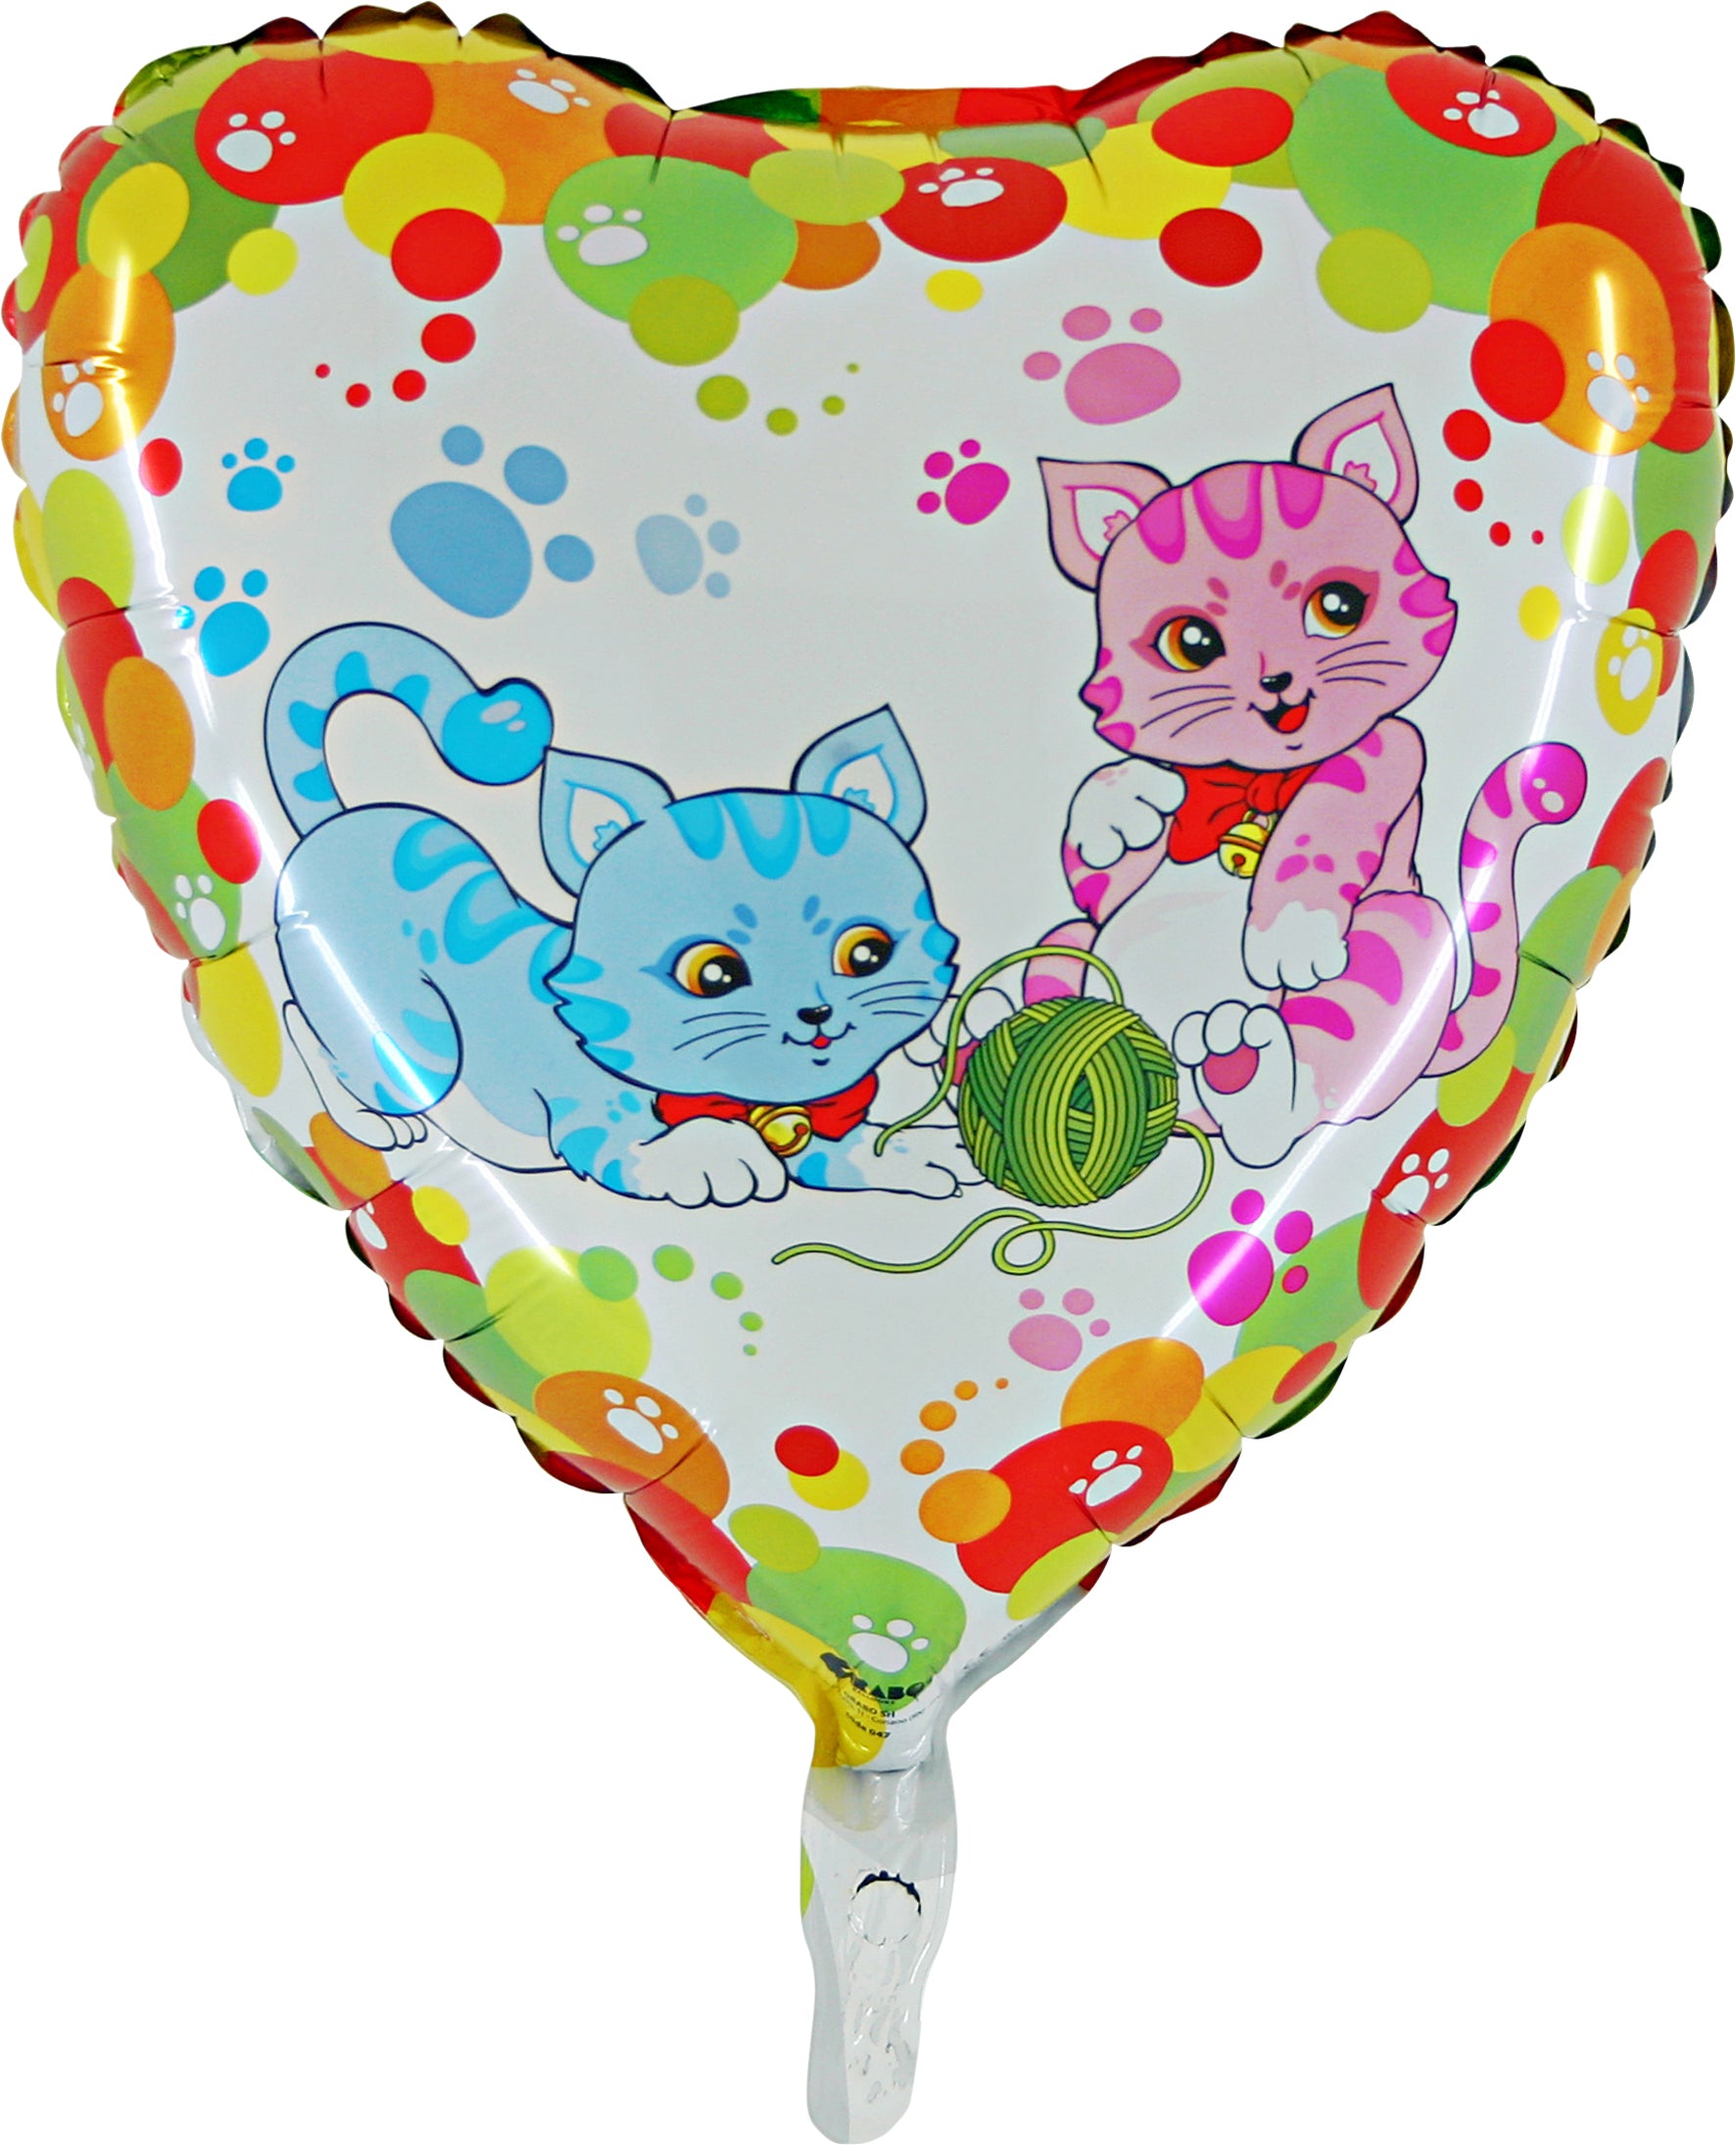 colorful heart shaped balloon with blue and pink cats